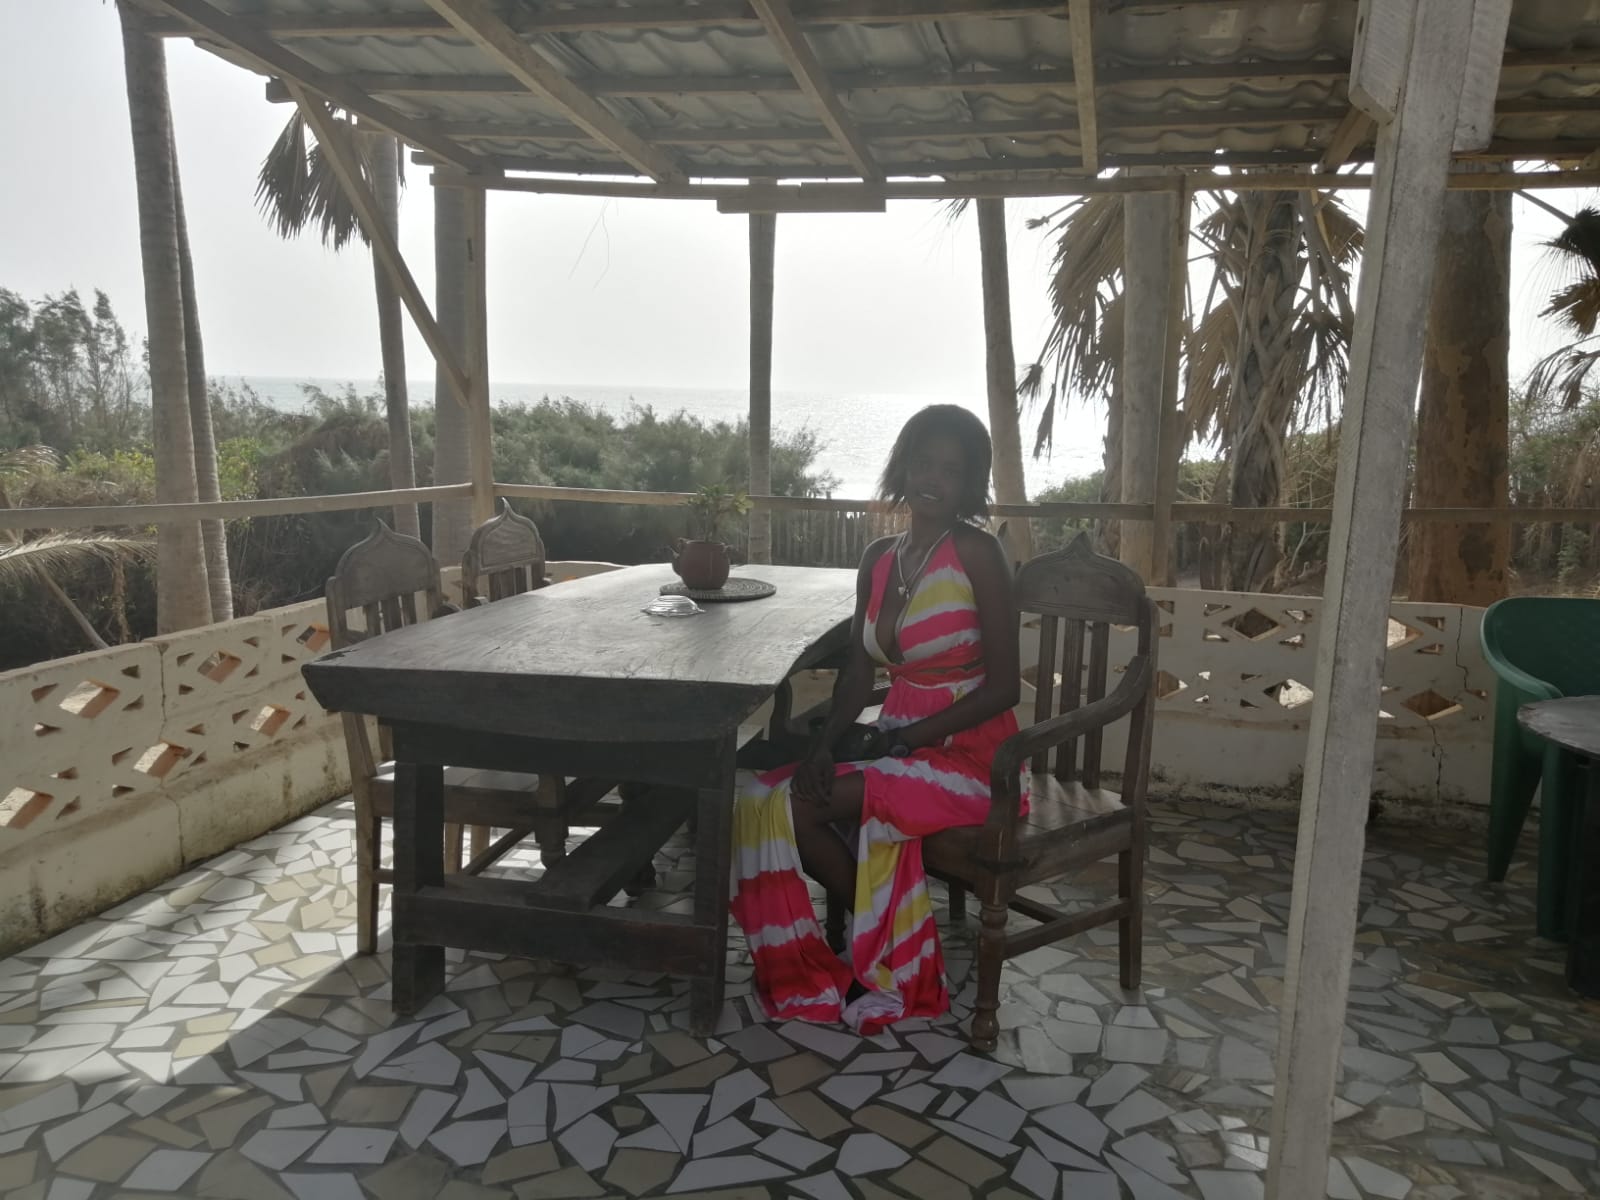 BoboiBeachRestauBeachBackground - GAMBIA: WHY DOES A VACATION AT BOBOI BEACH RESORT MAKE YOU HAPPY AND AN AFRICA HOLIDAY AN UNFORGETTABLE EXPERIENCE?